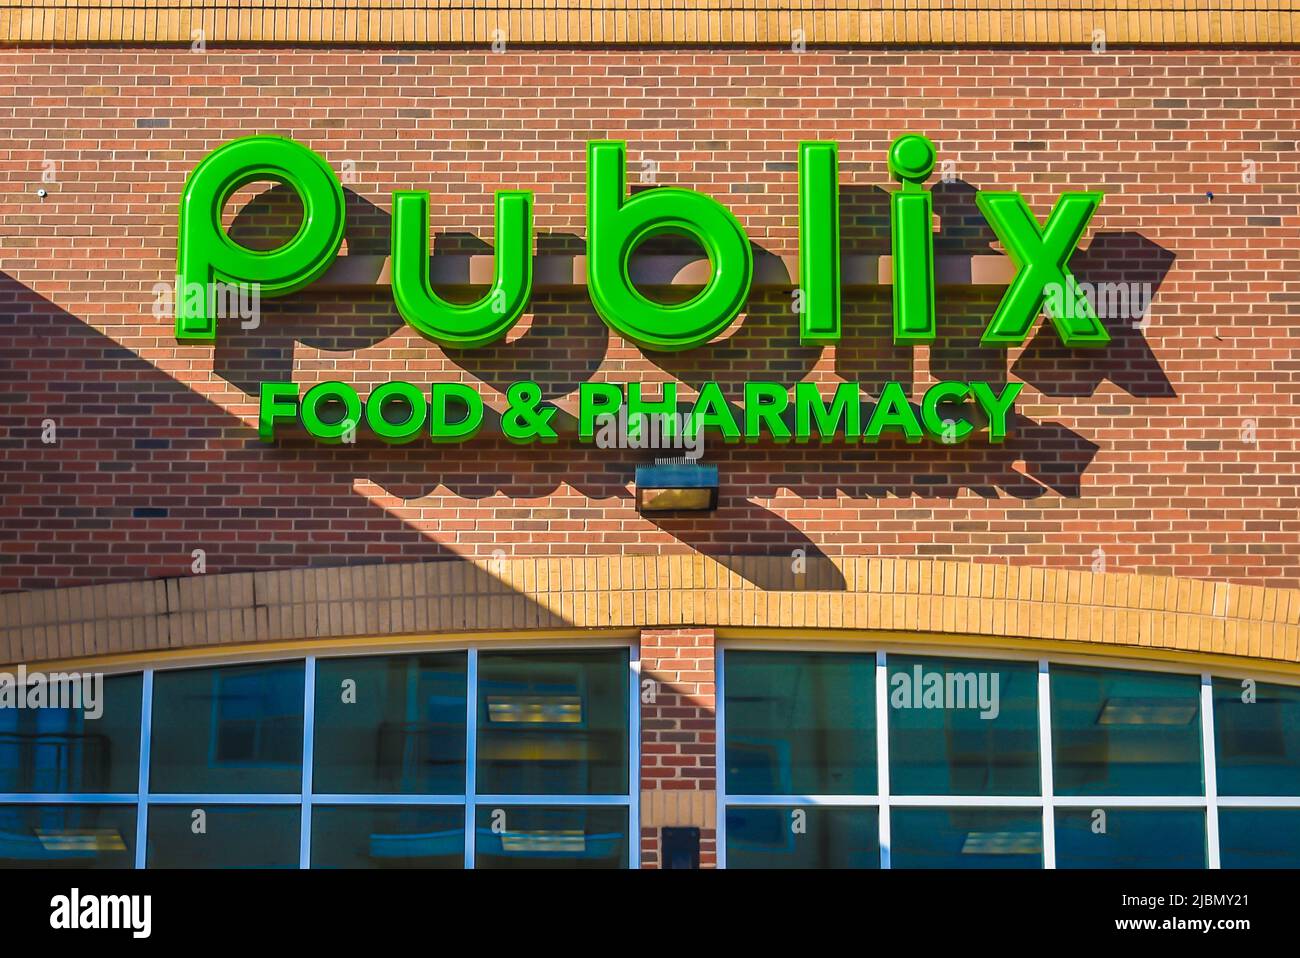 Publix Food and Pharmacy's exterior facade brand and logo signage in neon green with shadows at sunset on a sunny day in Charlotte, North Carolina. Stock Photo